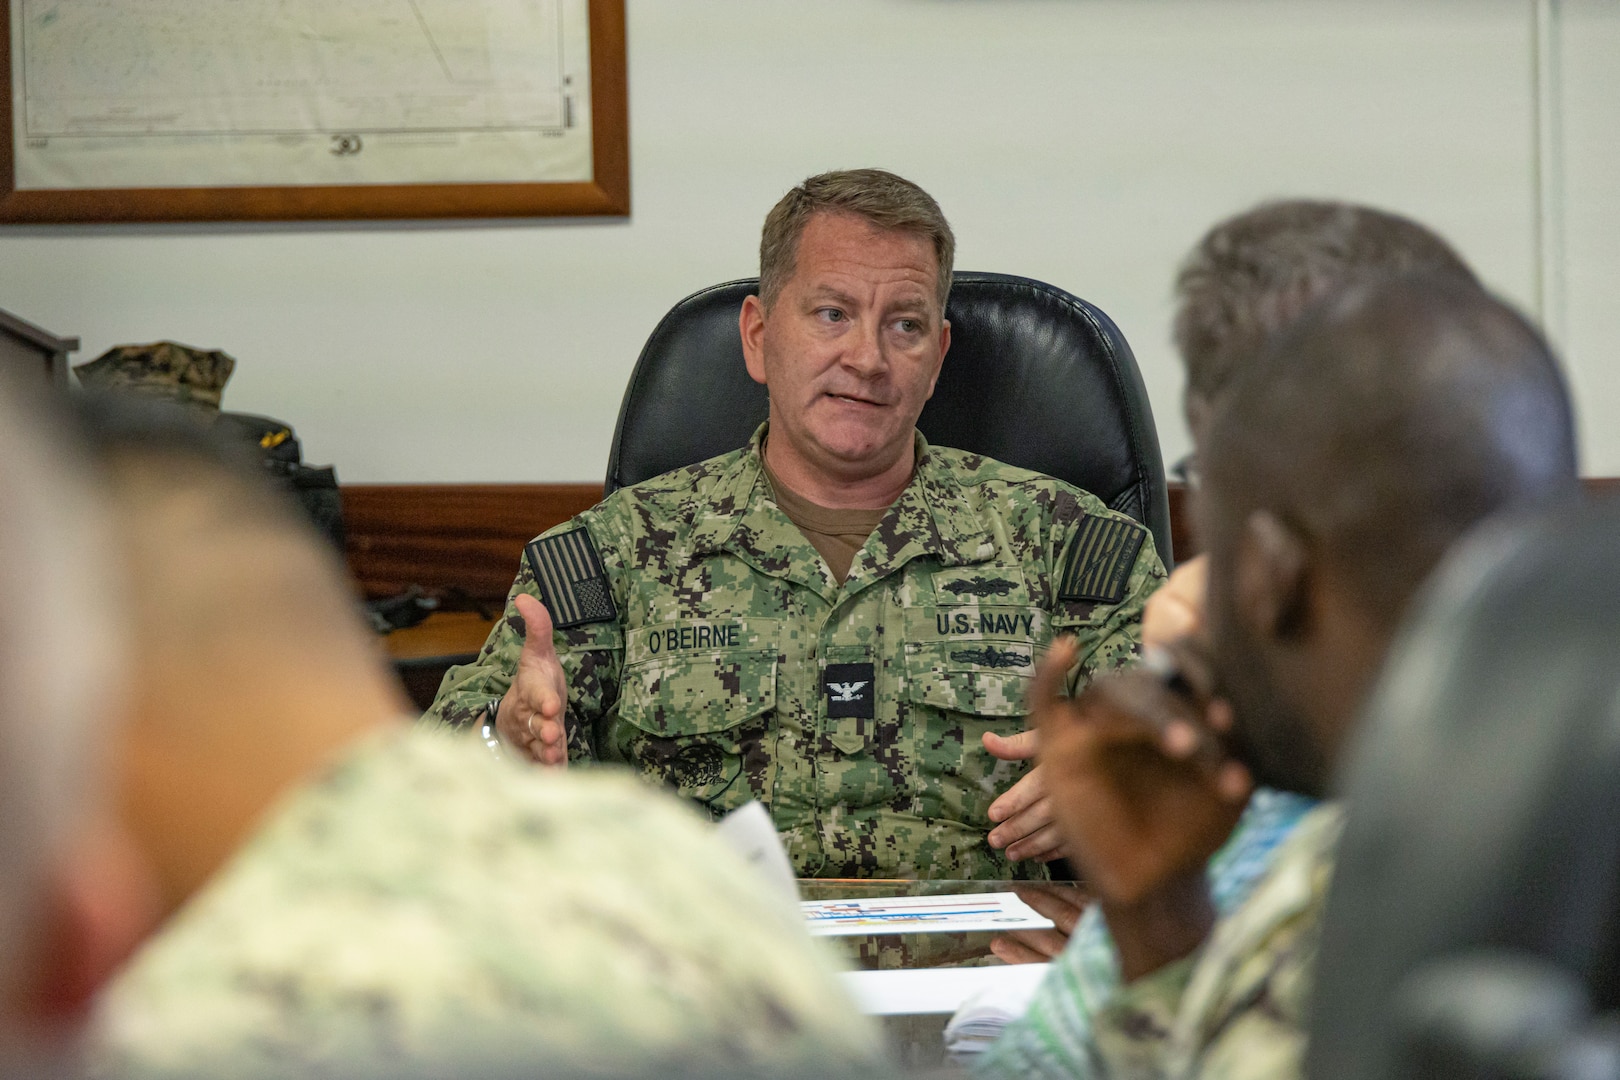 U.S. Navy Capt. Michael O’Beirne, Joint Task Force Red-Hill response directorate, briefs members during a spill response planning exercise brief at Joint Base Pearl Harbor-Hickam, Hawaii, Feb. 9, 2023. The exercise is designed to enhance first responder effectiveness and will involve approximately 200 people. (U.S. Marine Corps photo by Sgt. Sarah Stegall)